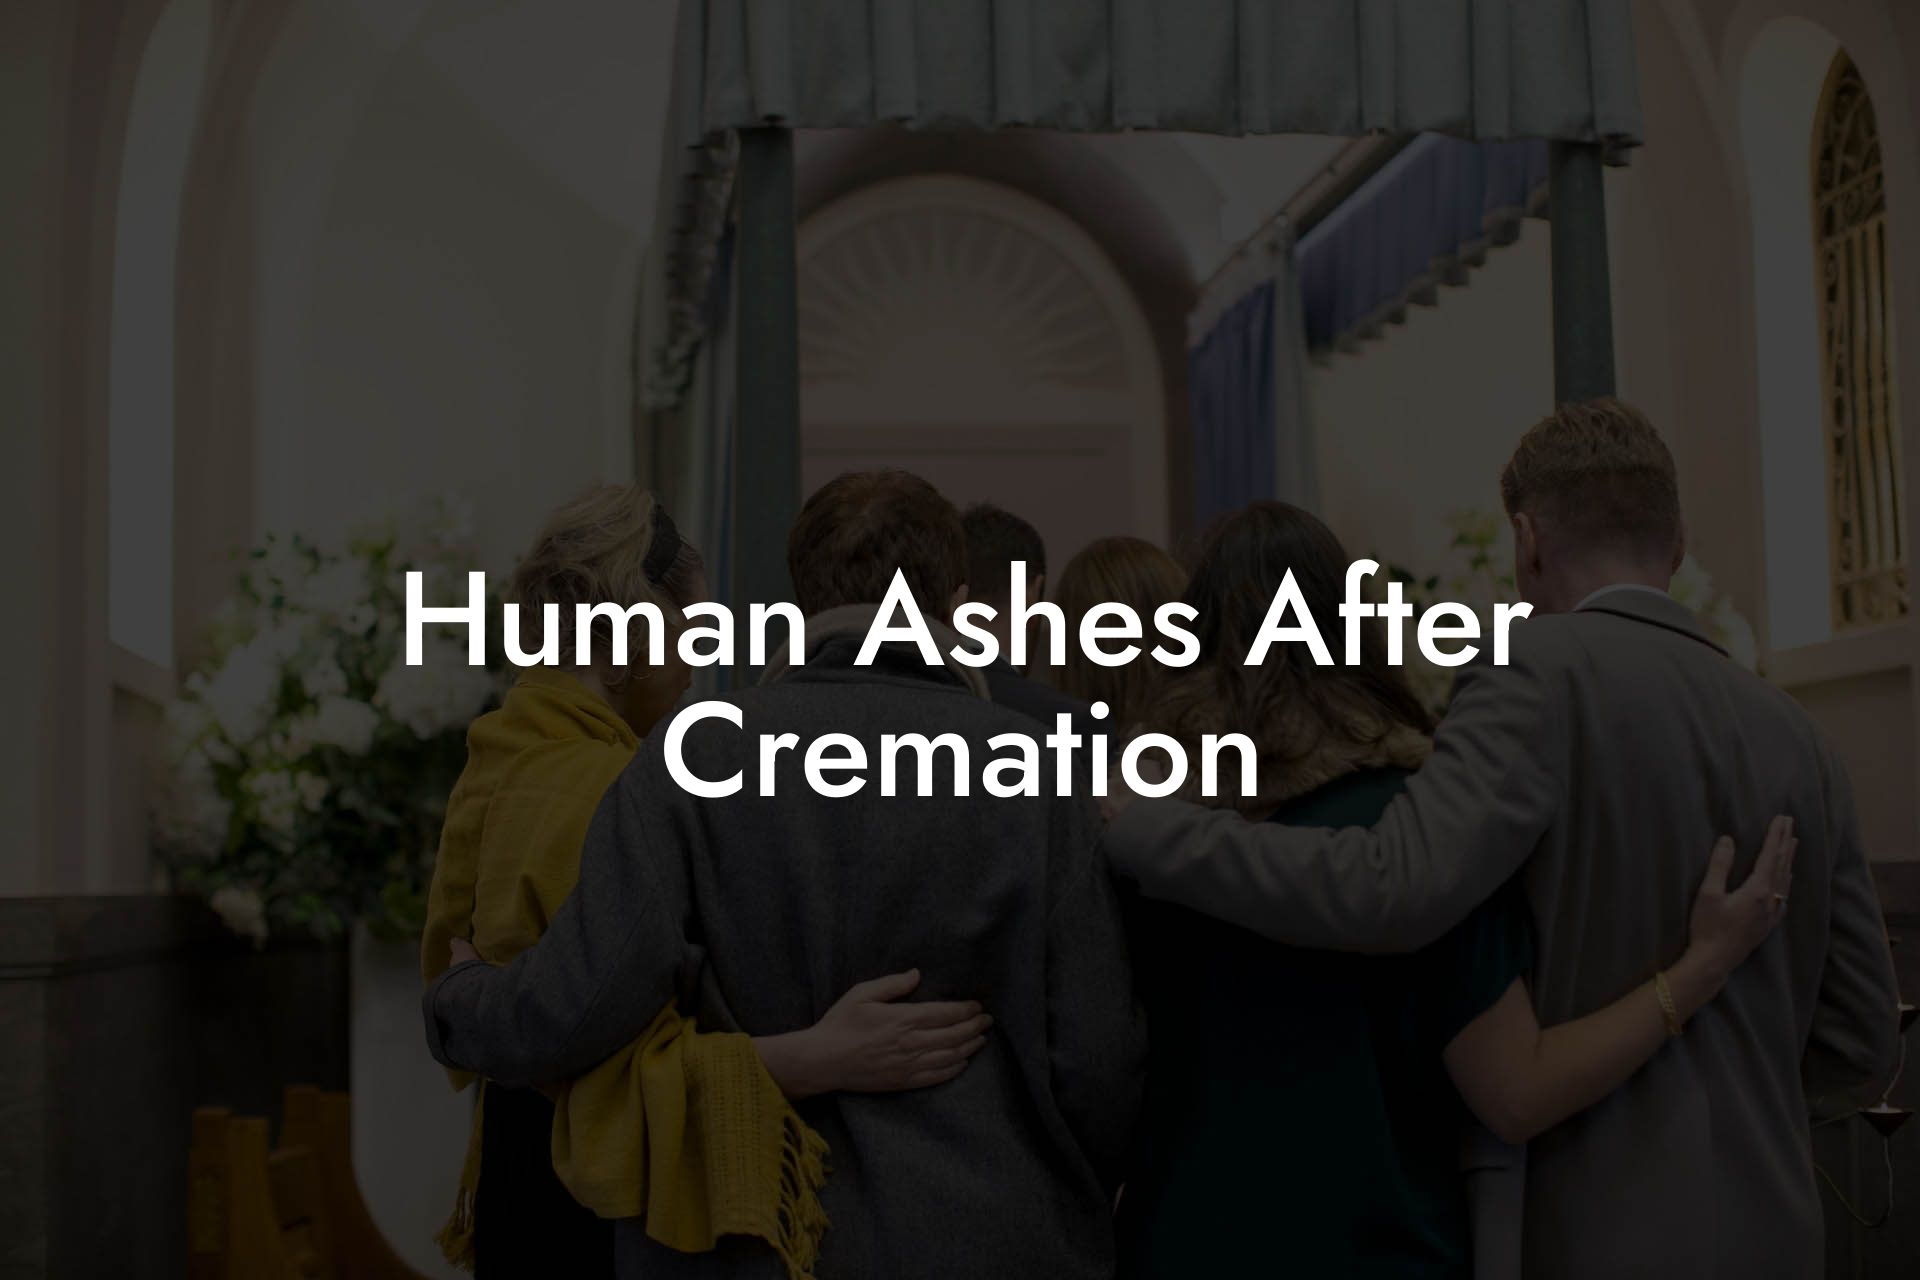 Human Ashes After Cremation